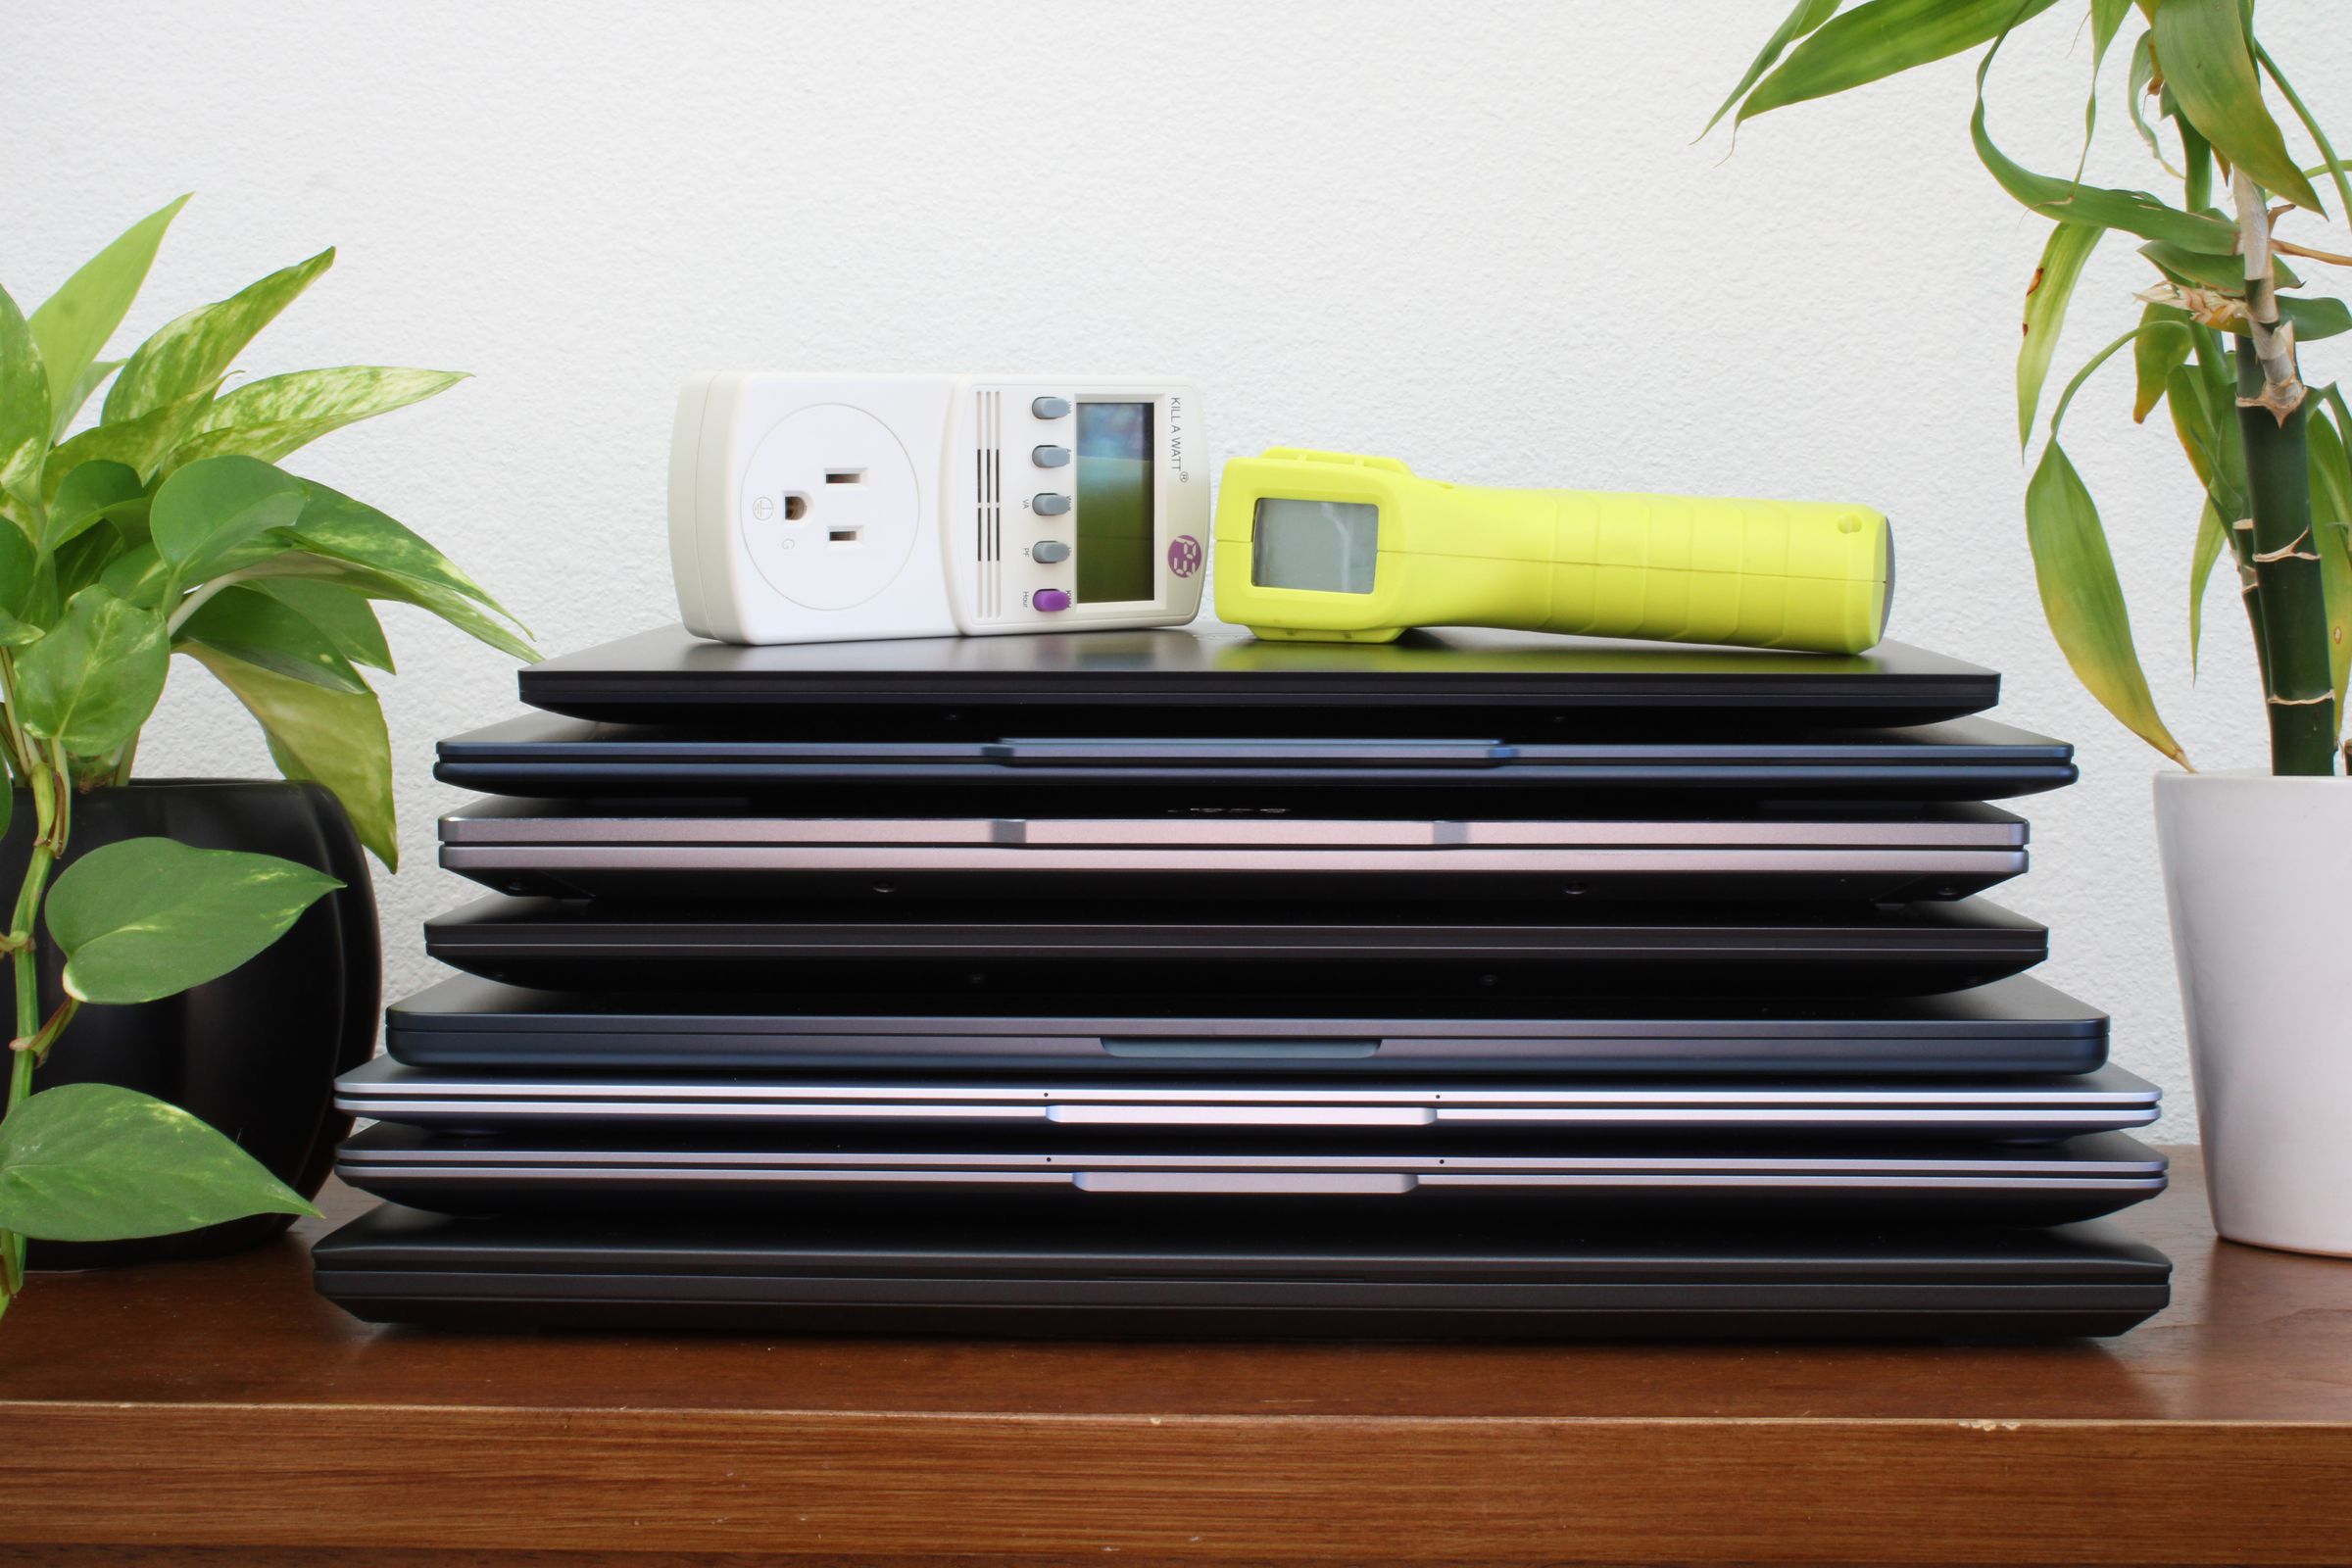 A stack of laptops on top of a brown table, flanked by two green plants, against a white wall.